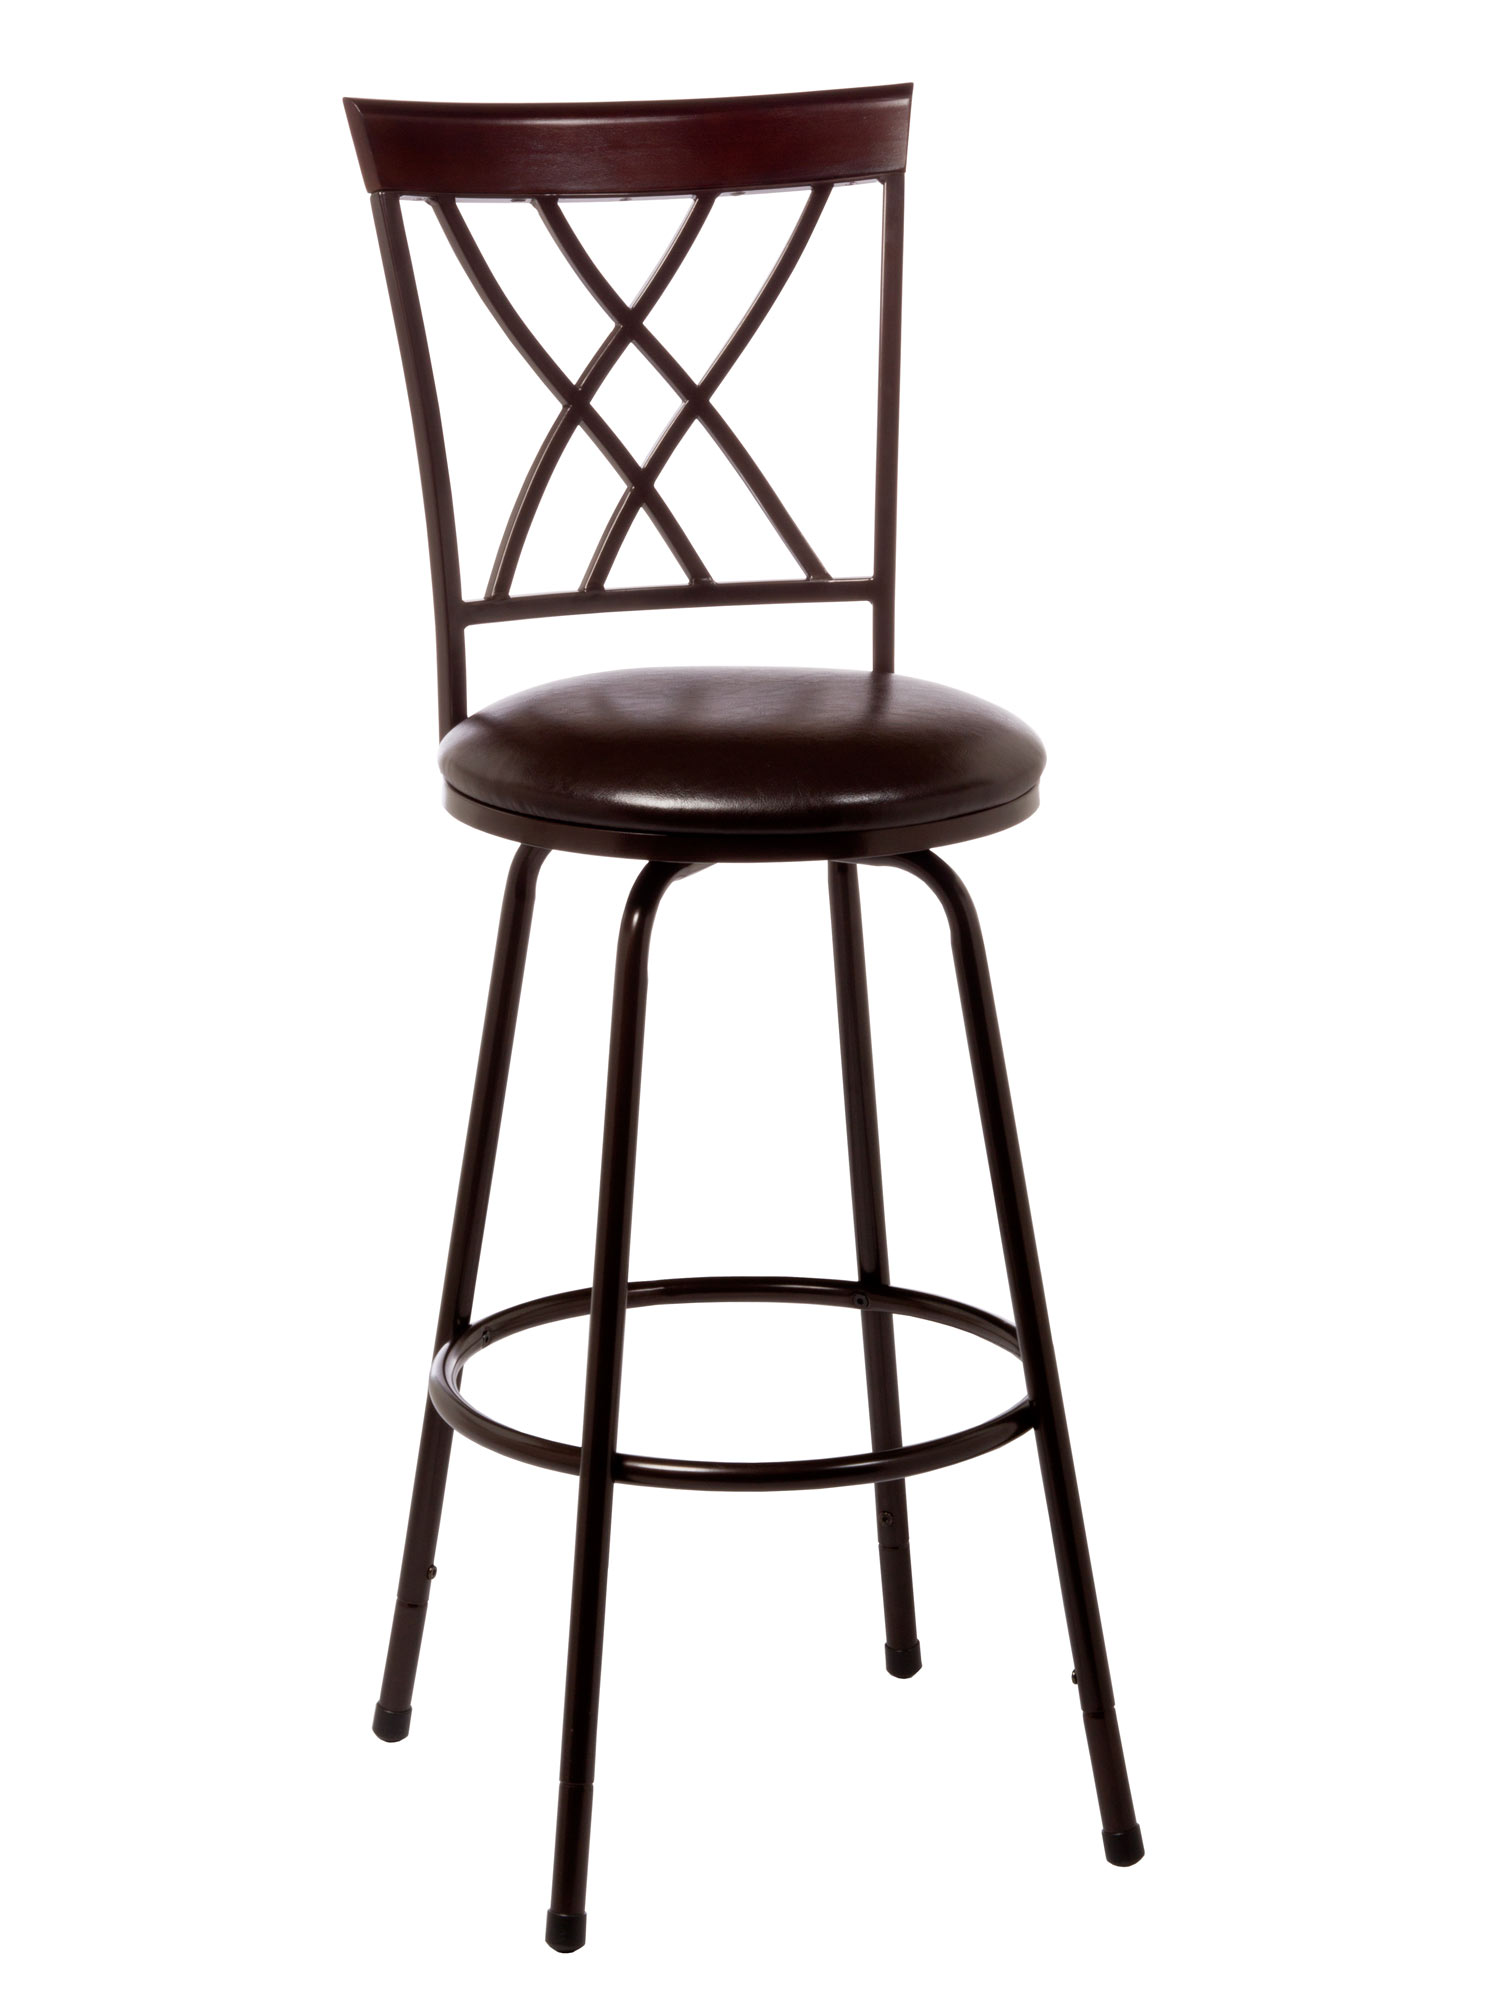 Hillsdale Northland Swivel Counter/Bar Stool - Brown/Cherry